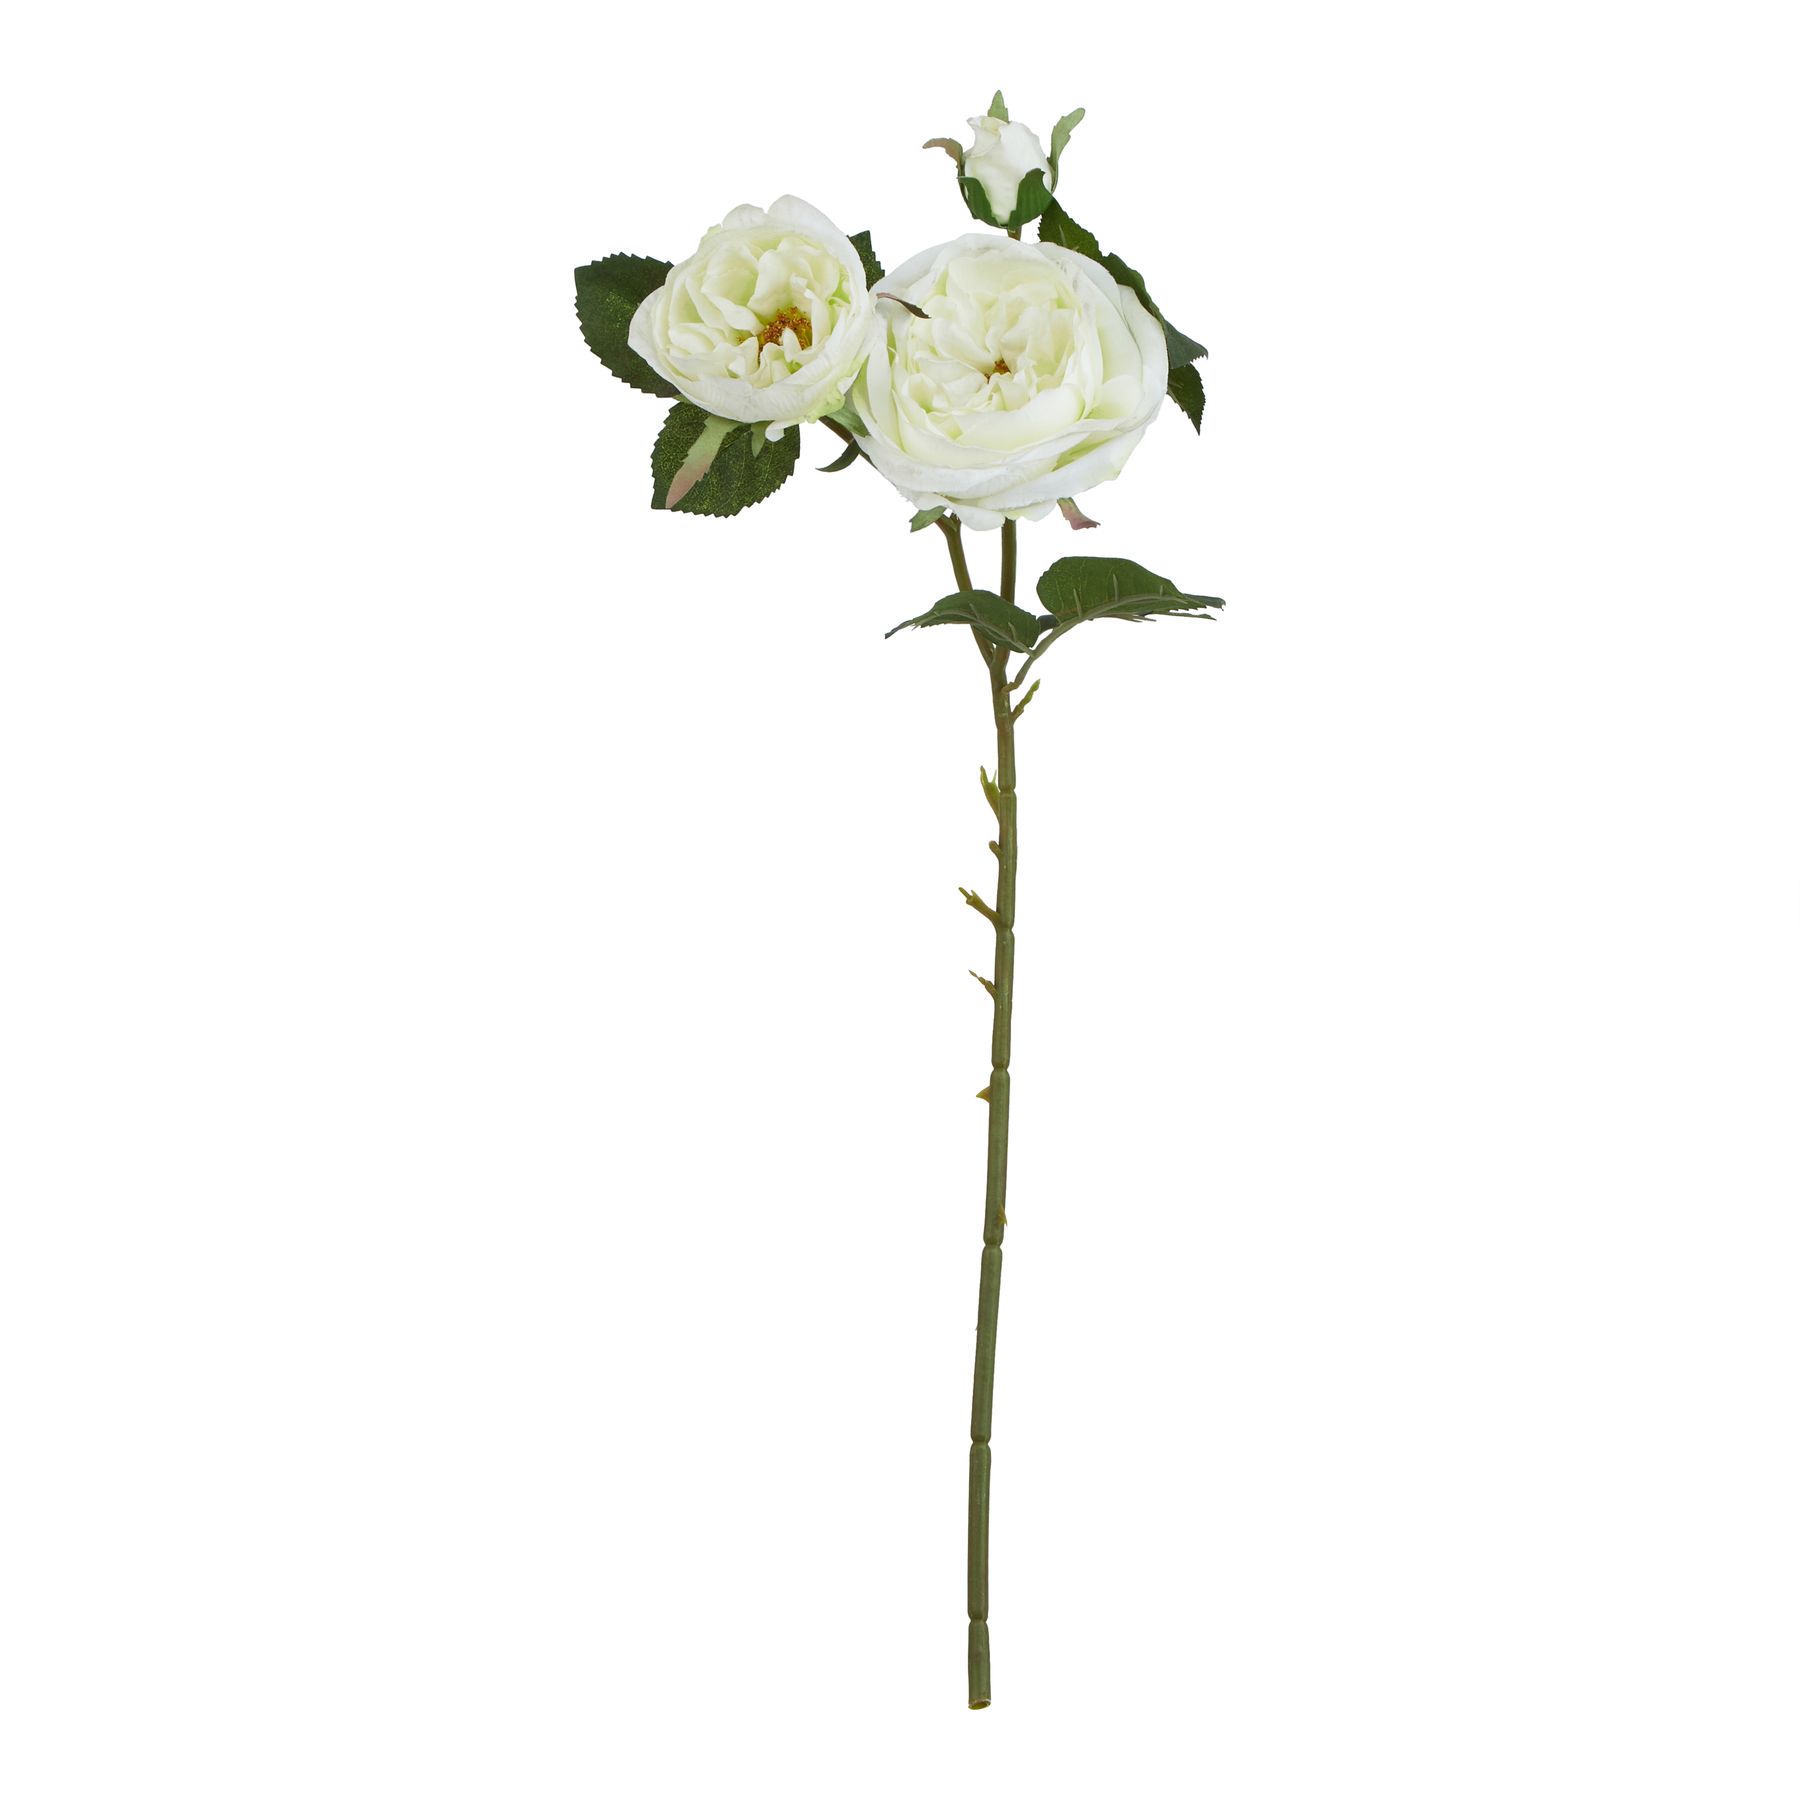 The Natural Garden Collection White Charity Rose - Image 1